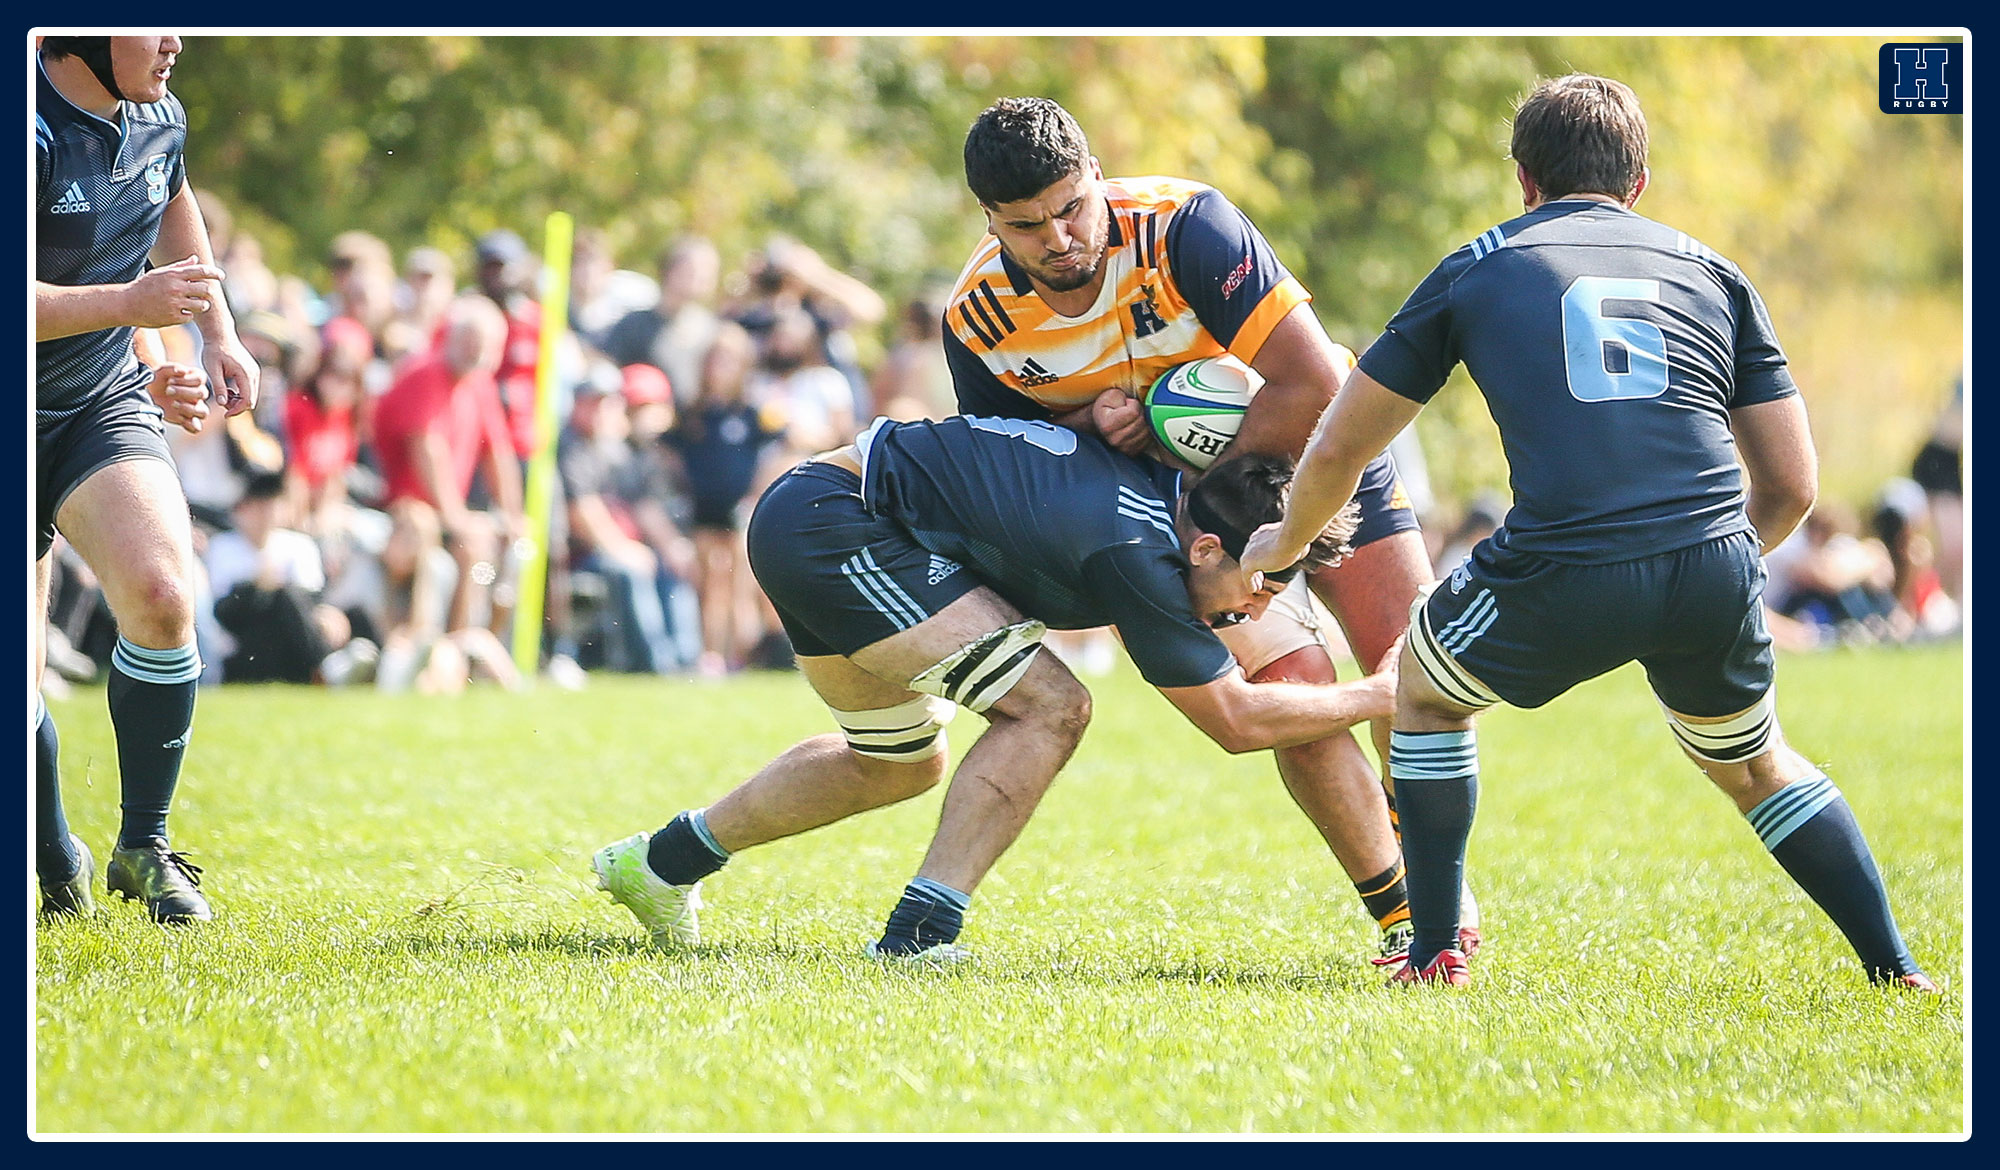 Humber player trying to run through a Sheridan defender in rugby